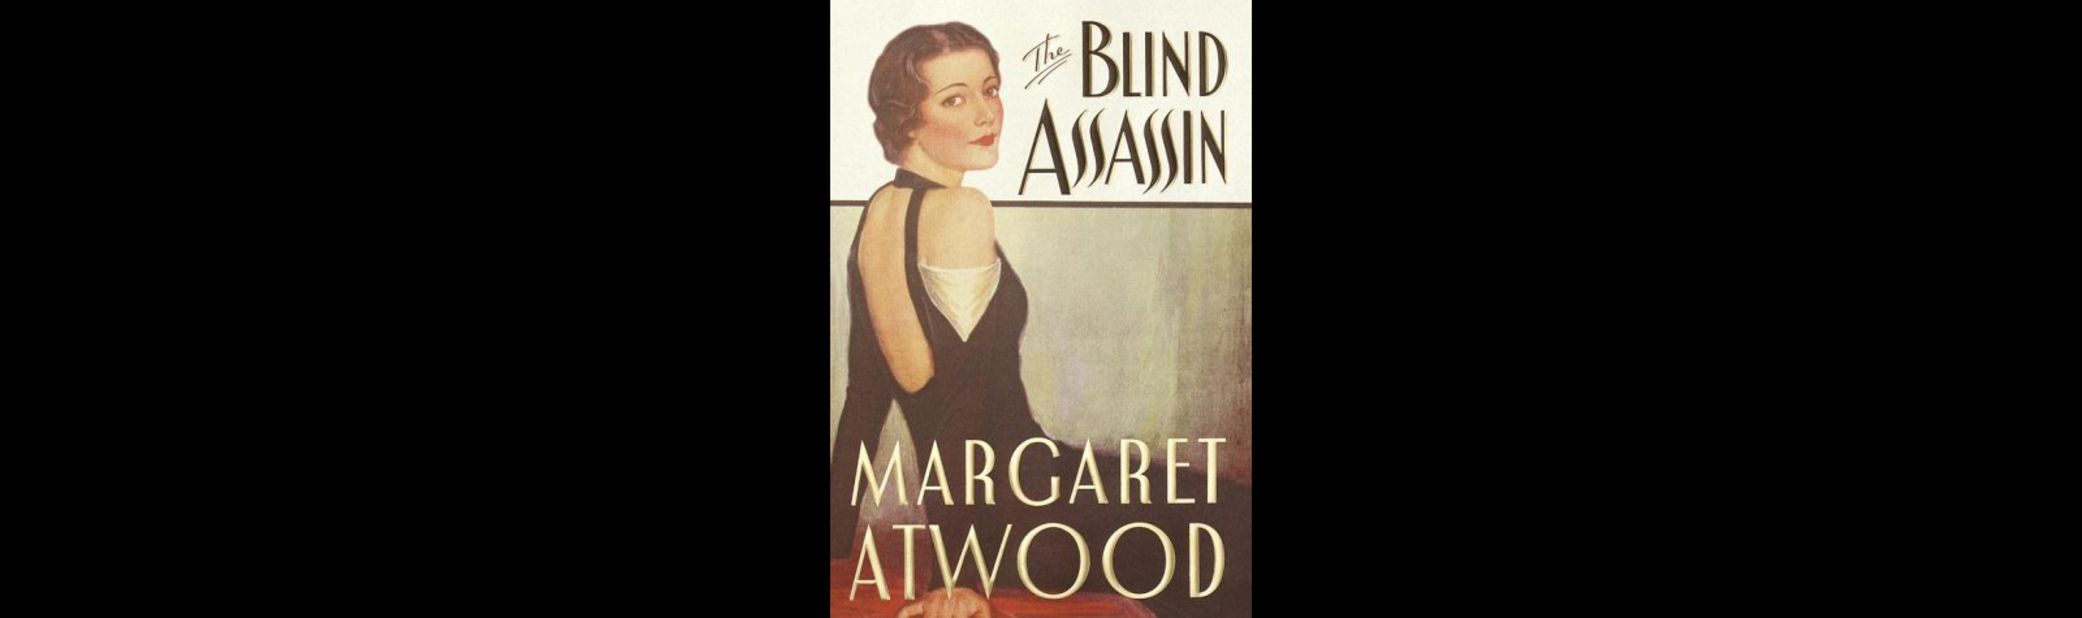 "The Handmaid's Tale" made the big screen and other Margaret Atwood works have been adapted for television, but her 2000 Booker Prize winner, "The Blind Assassin," has yet to make the jump.